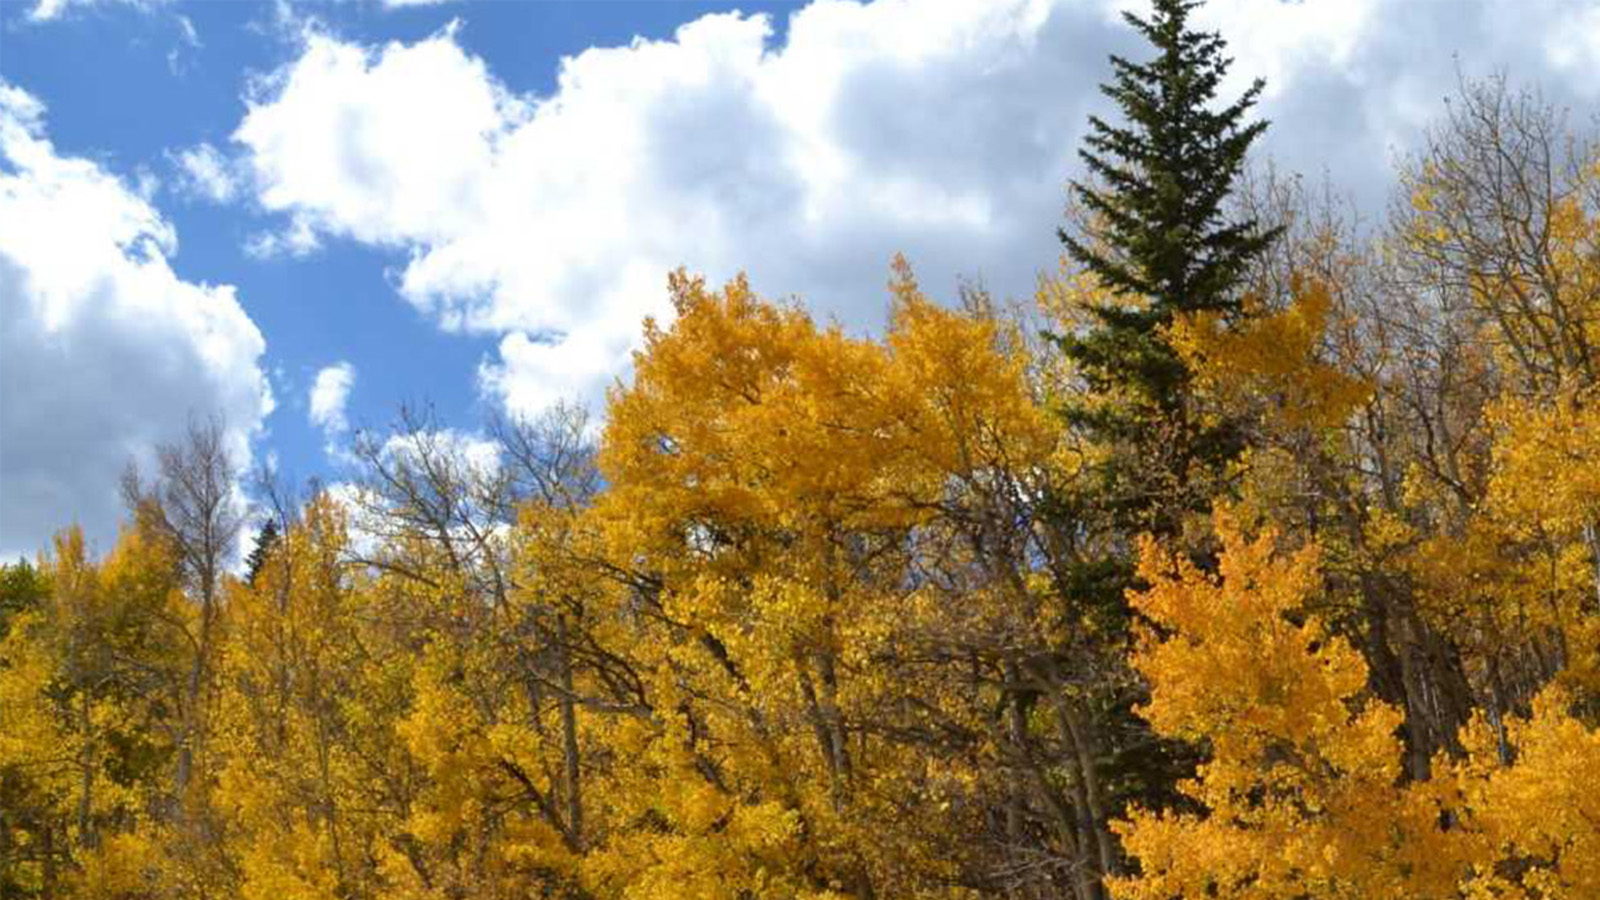 Colorado Fall Color Change Expected To Be Fabulous Show – CBS Denver